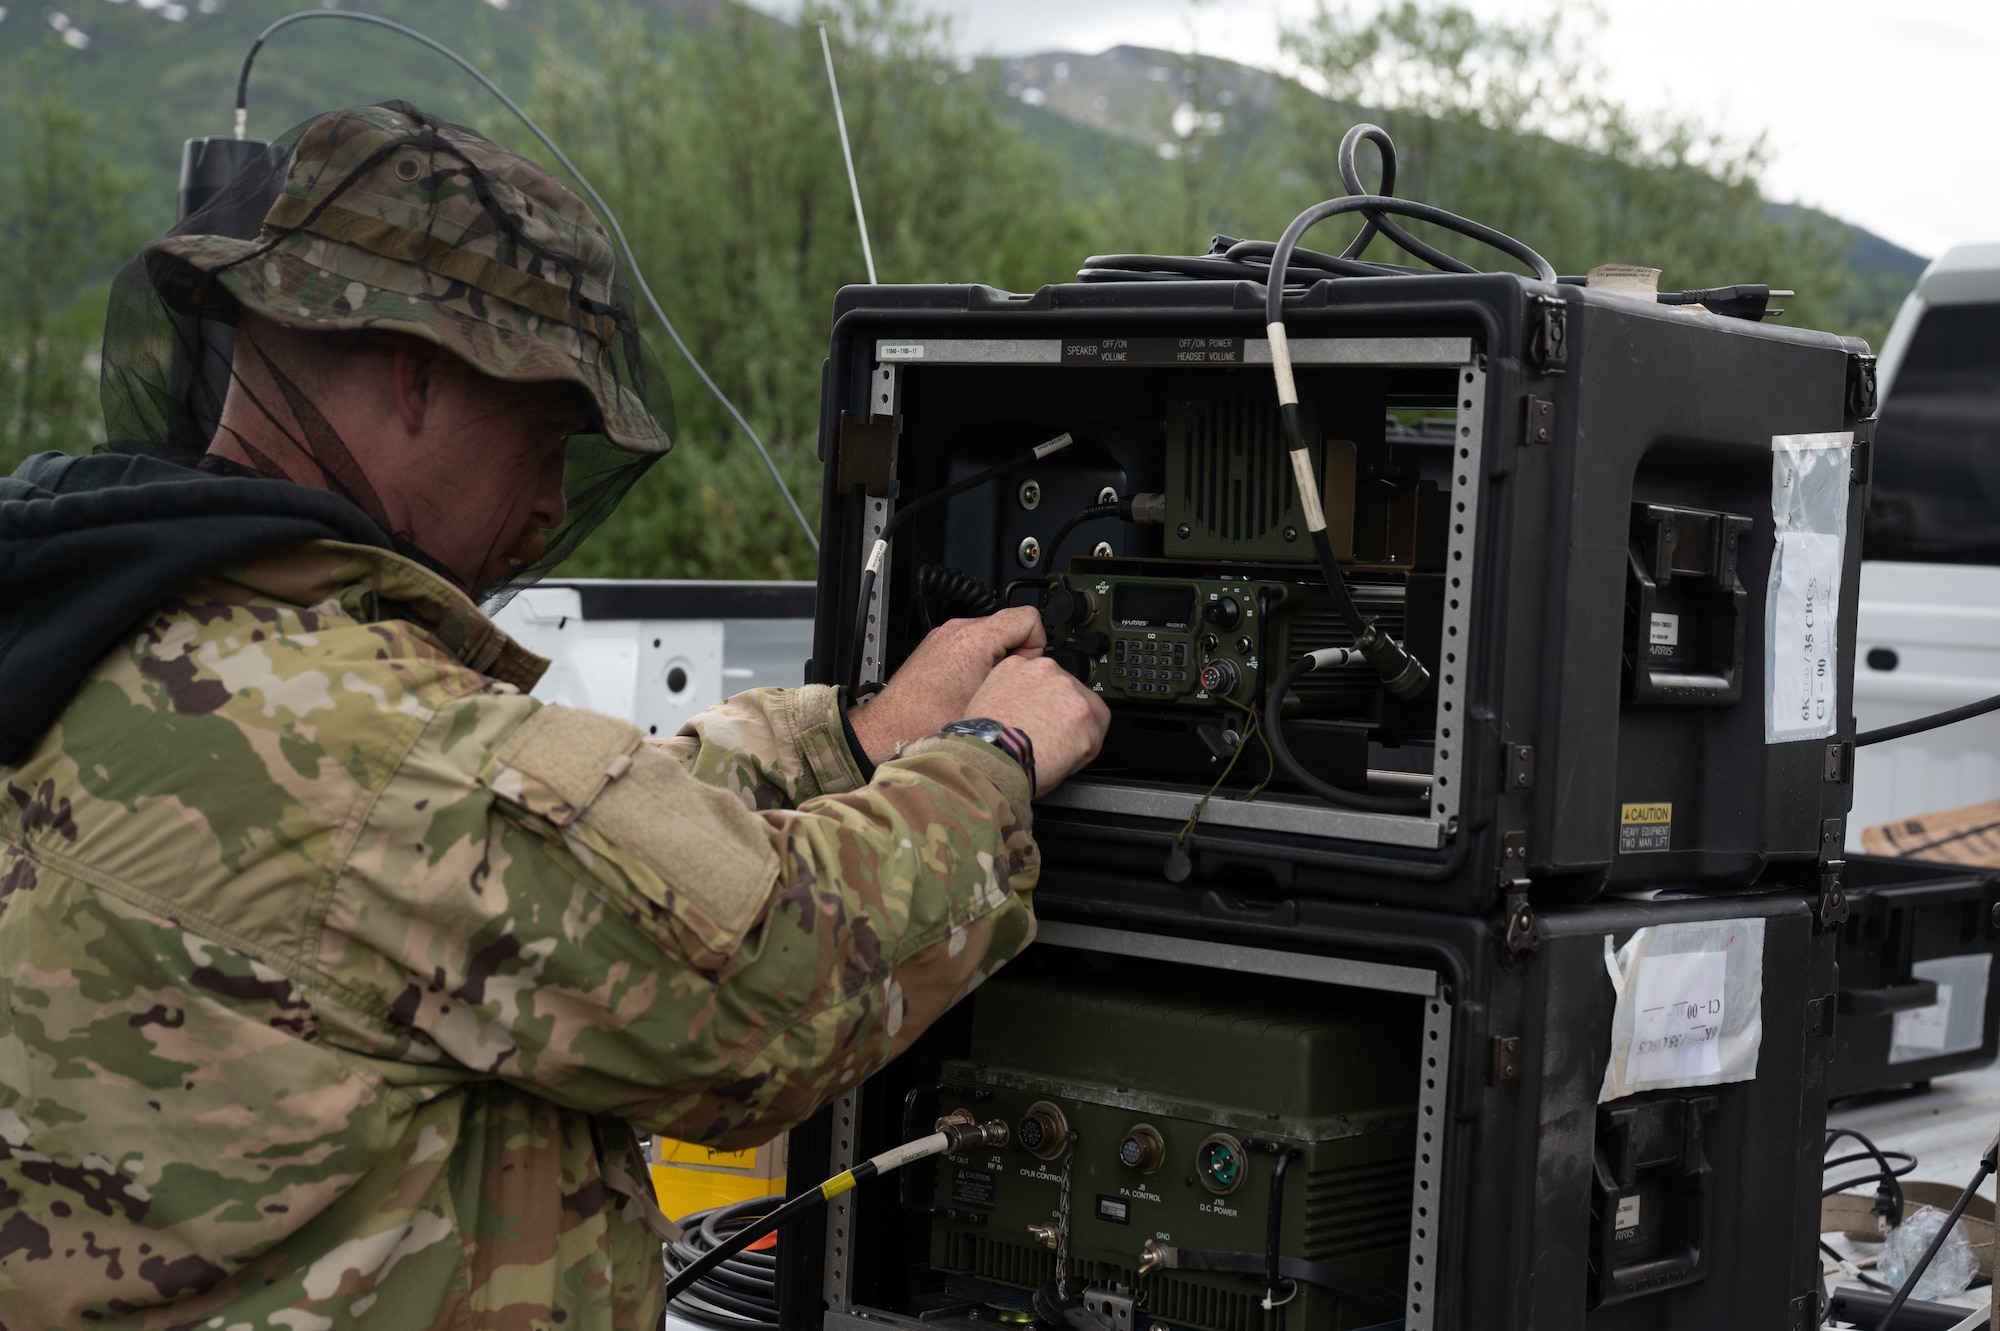 U.S. Air Force Tech Sgt. Laramie Grisba, a radio frequency transmission systems specialist, 55th Combat Communications Squadron, Tinker Air Force Base, Oklahoma attaches a high frequency radio communication device to a protective frame while getting communications set up in Coldfoot, Alaska as part of Exercise AGILE BLIZZARD-UNIFIED VISION Phase II on June 11, 2023. The equipment for the Alaska portion of the exercise was powered, almost exclusively, by electrical power derived from the convoy vehicles and batteries. (U.S. Air Force photo by Staff Sgt. Dana Tourtellotte)